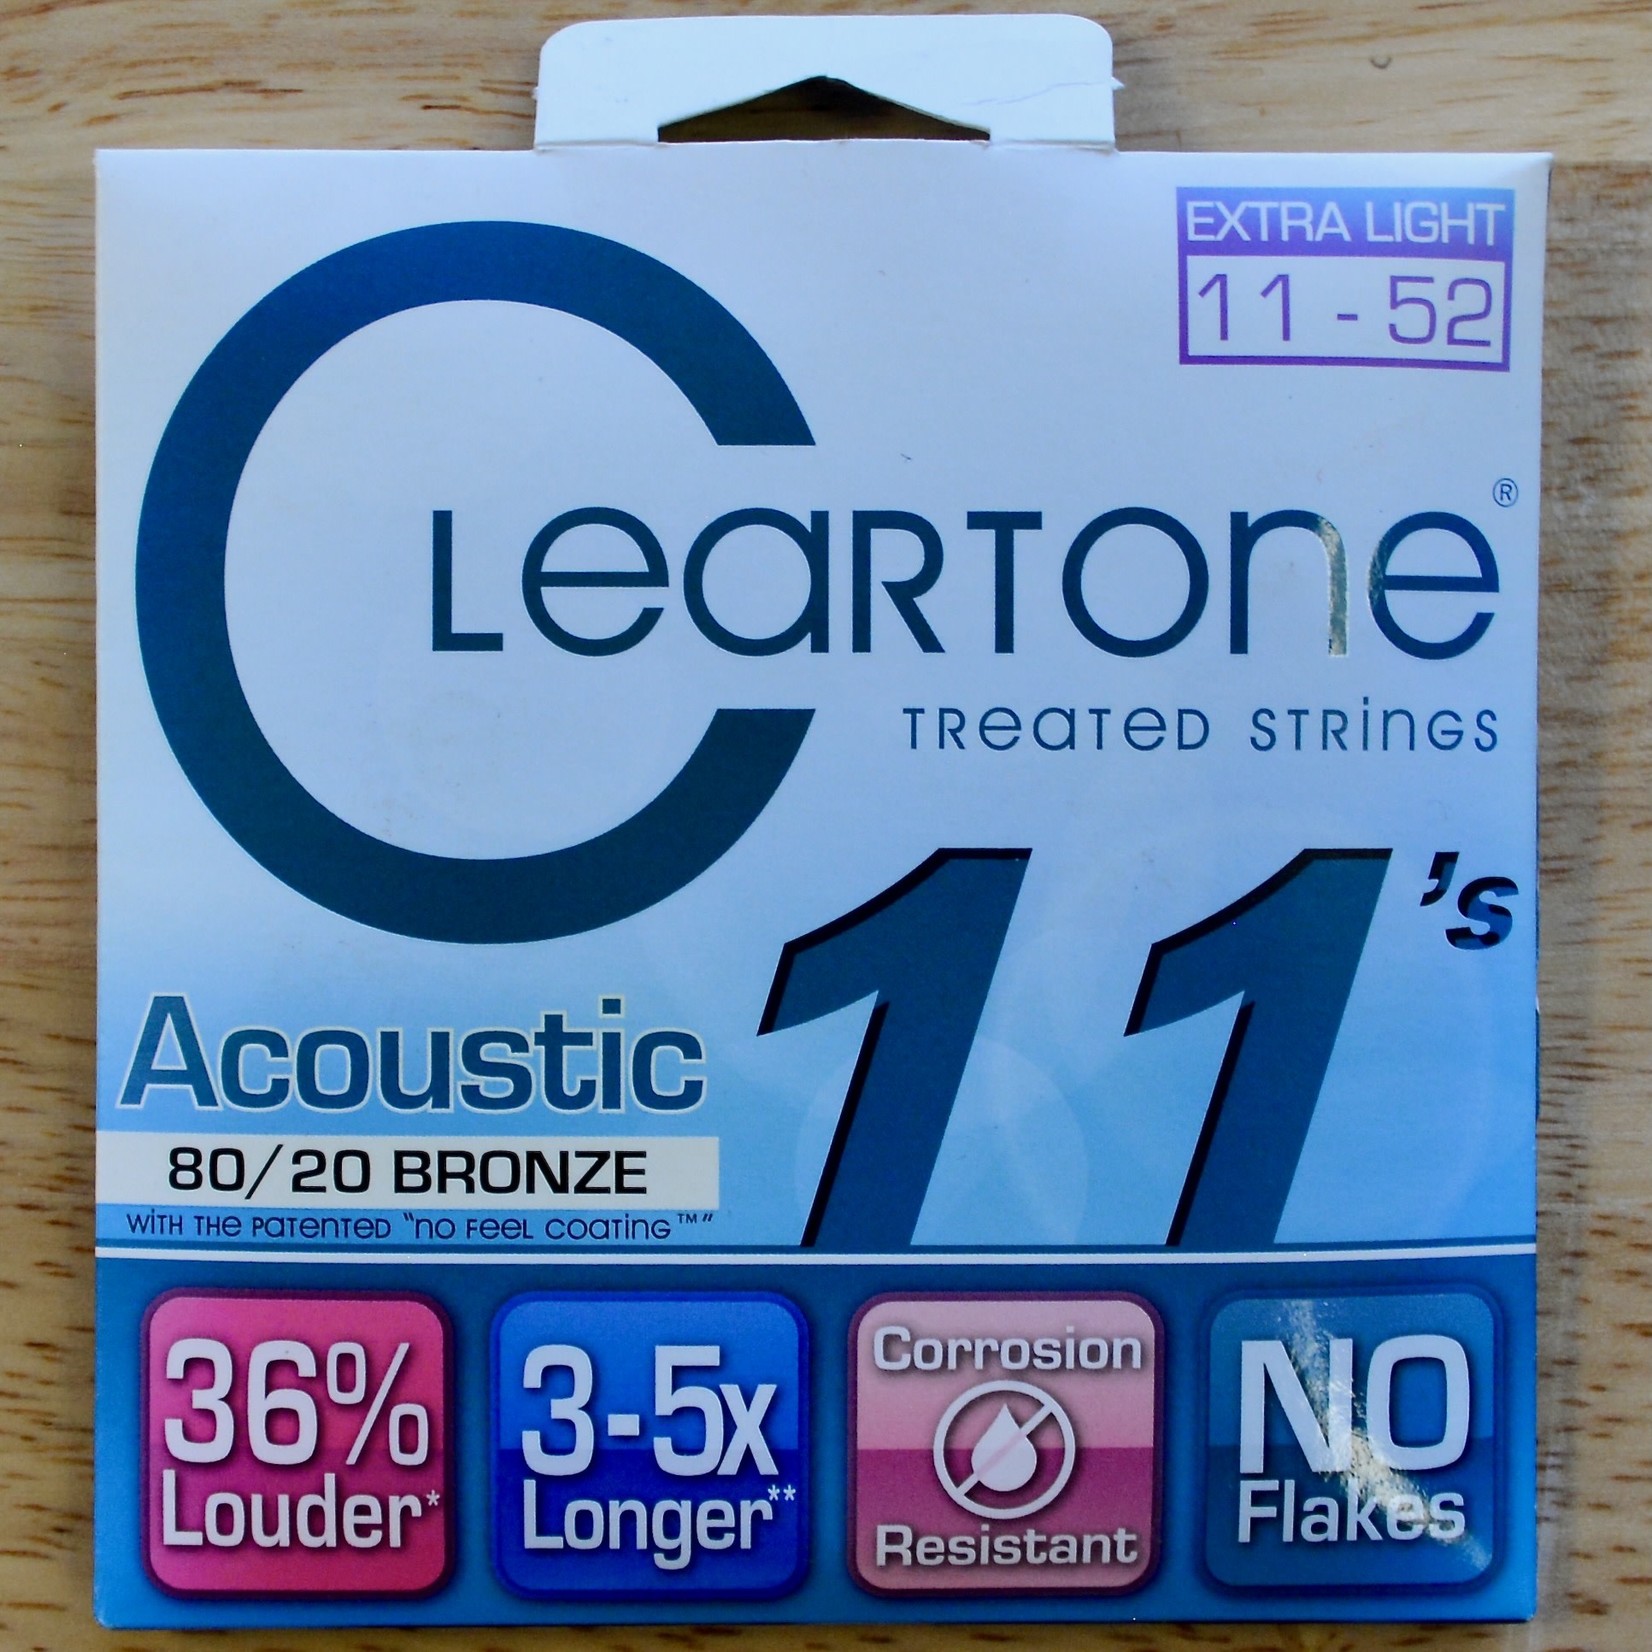 Cleartone Cleartone Treated Acoustic Strings 80/20 Bronze Extra Light